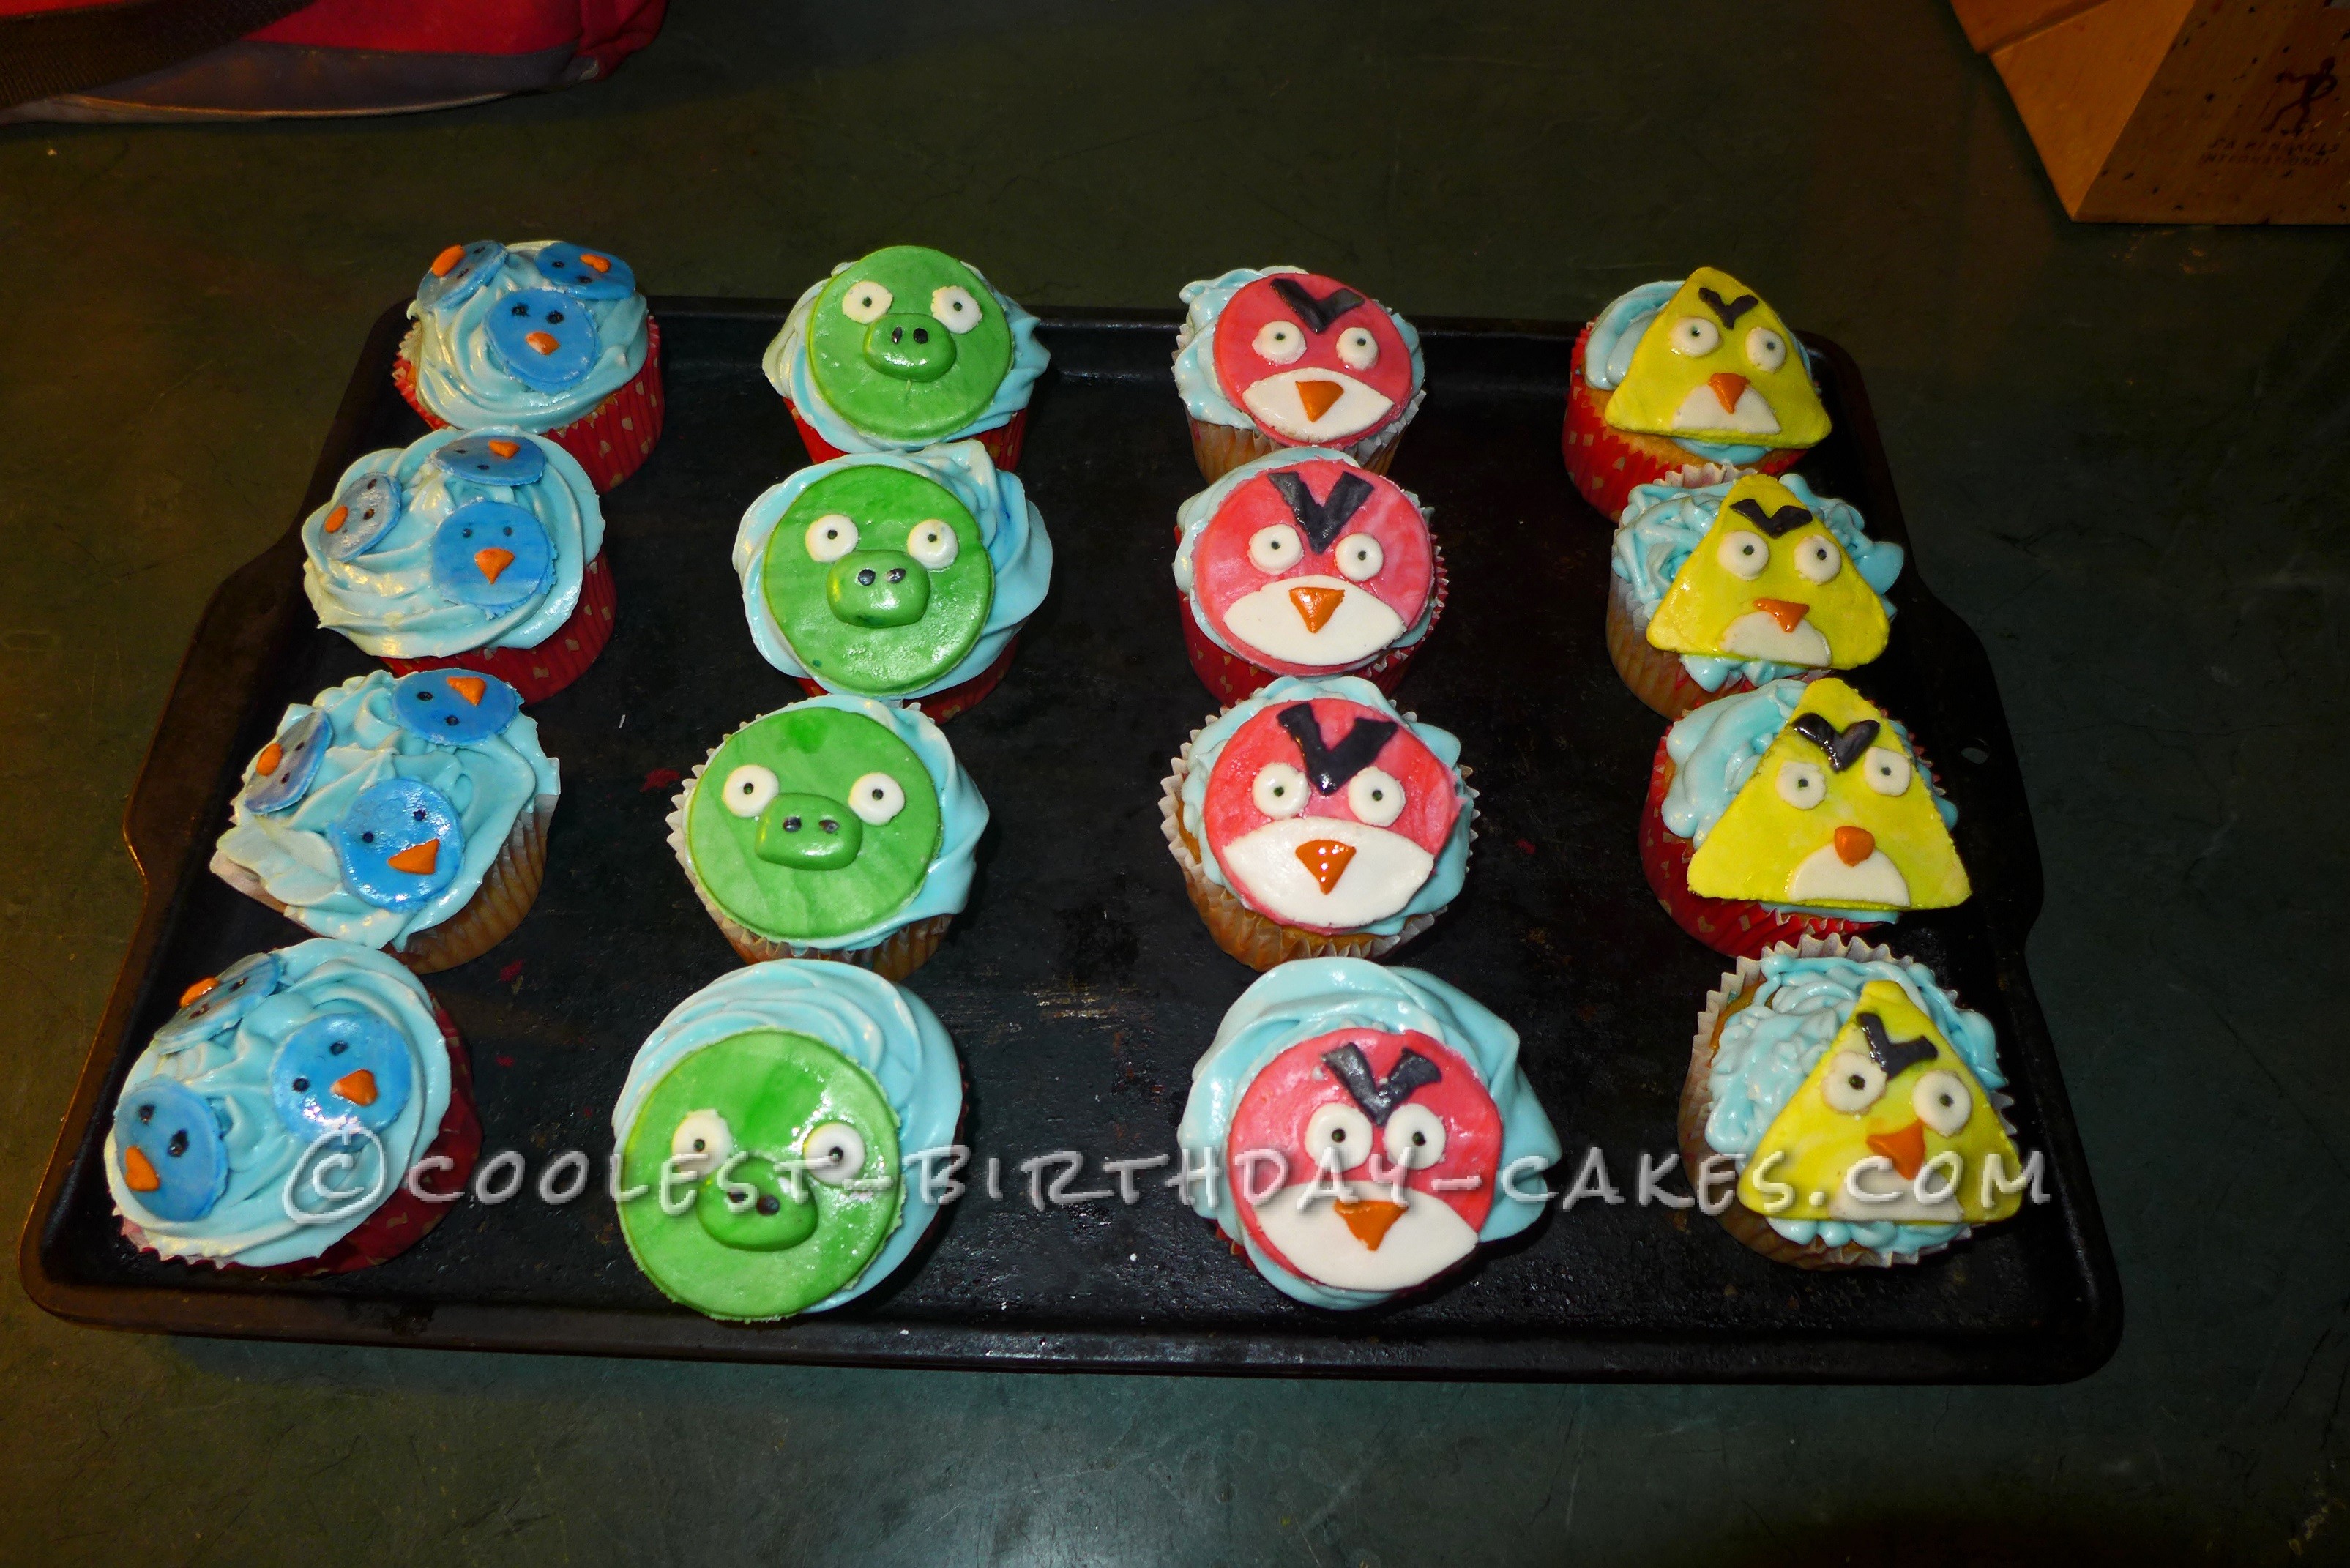 Coolest 2-D Angry Birds Cake and Cupcakes